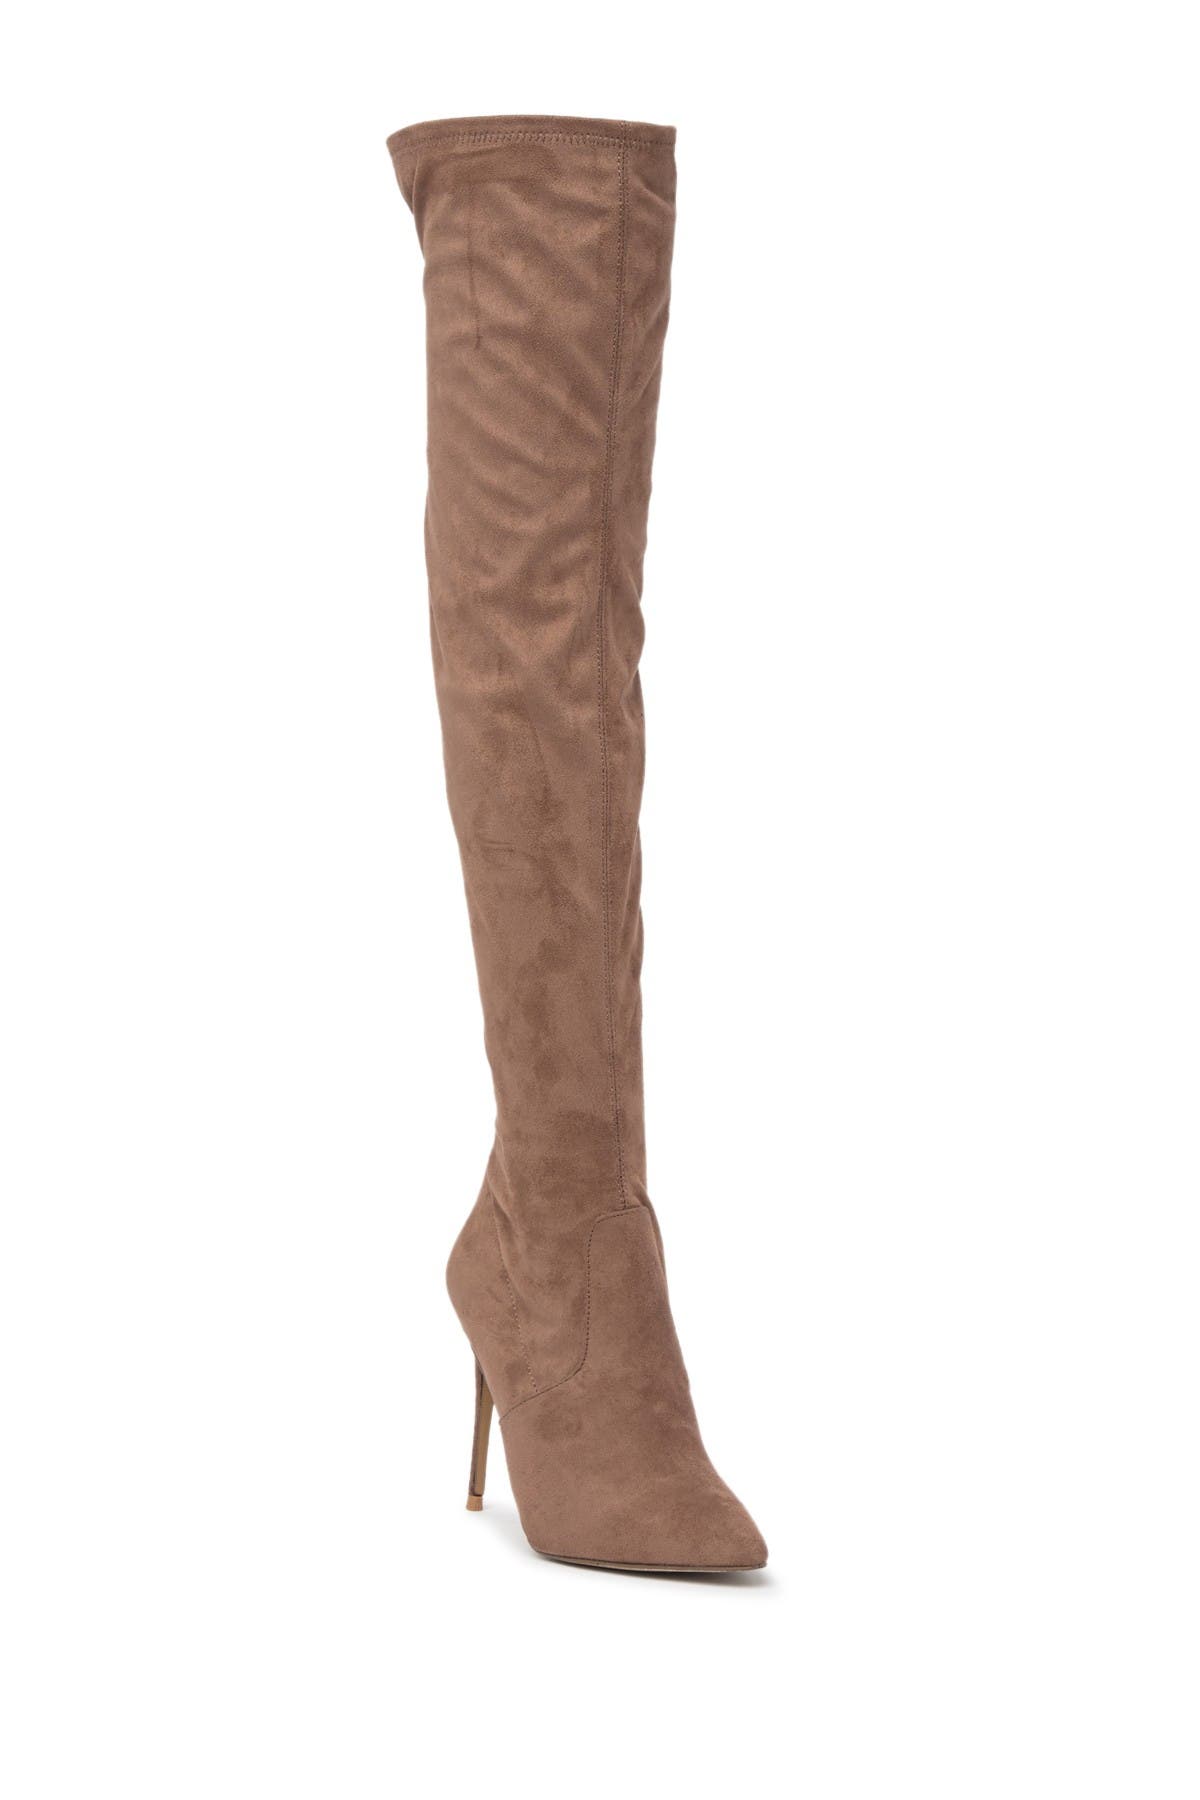 steve madden over the knee stretch boot